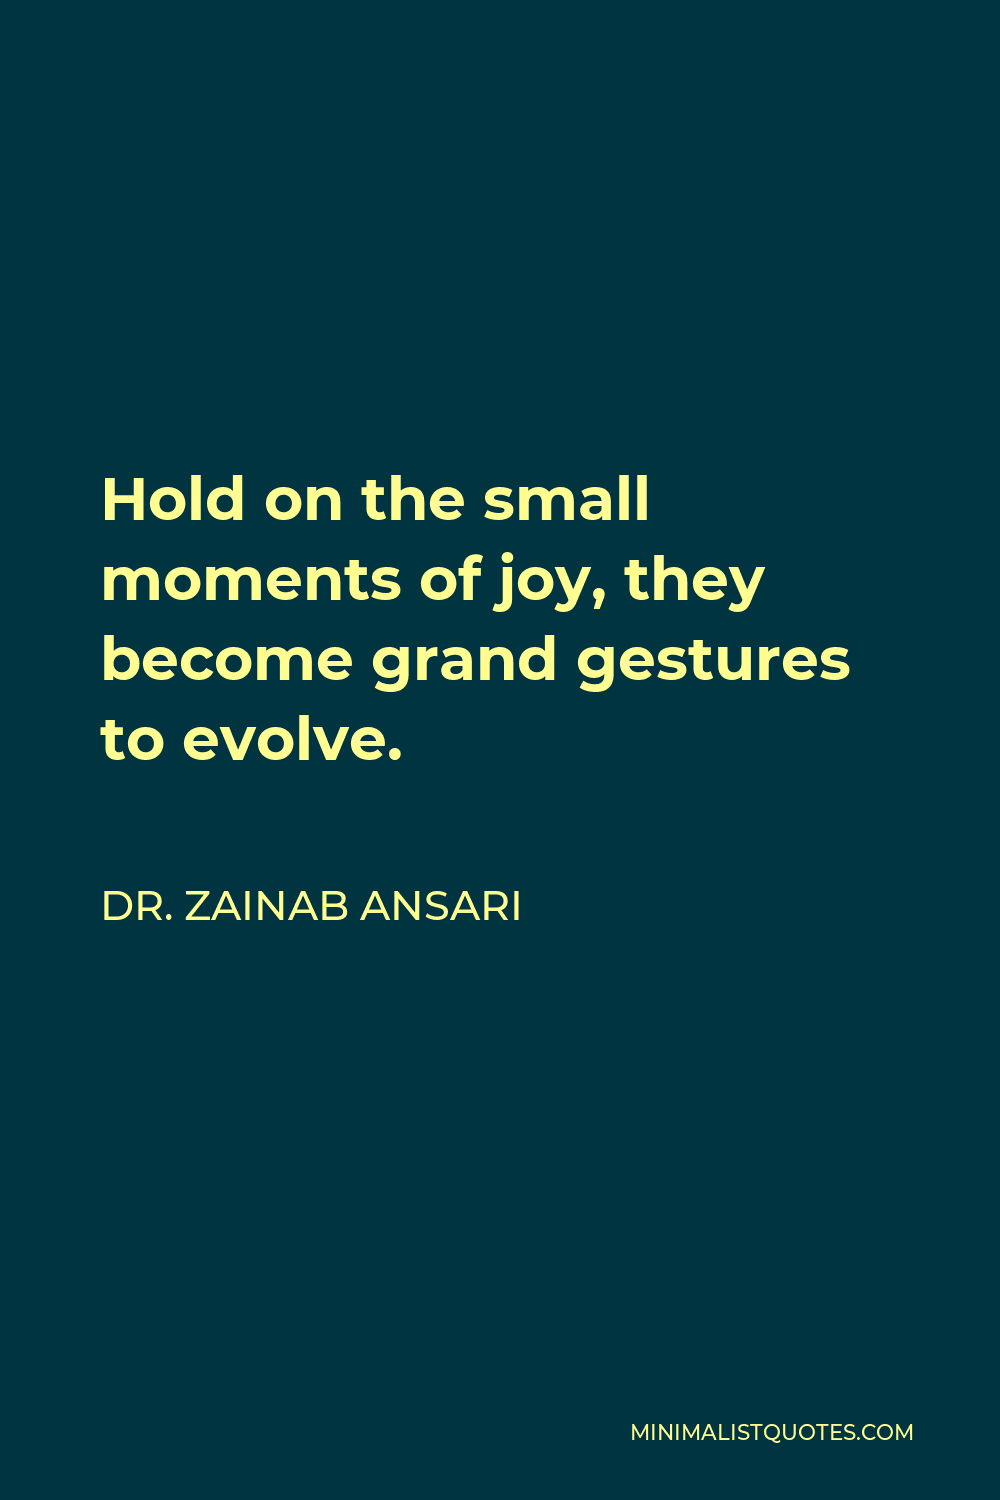 Dr. Zainab Ansari Quote - Hold on the small moments of joy, they become grand gestures to evolve.